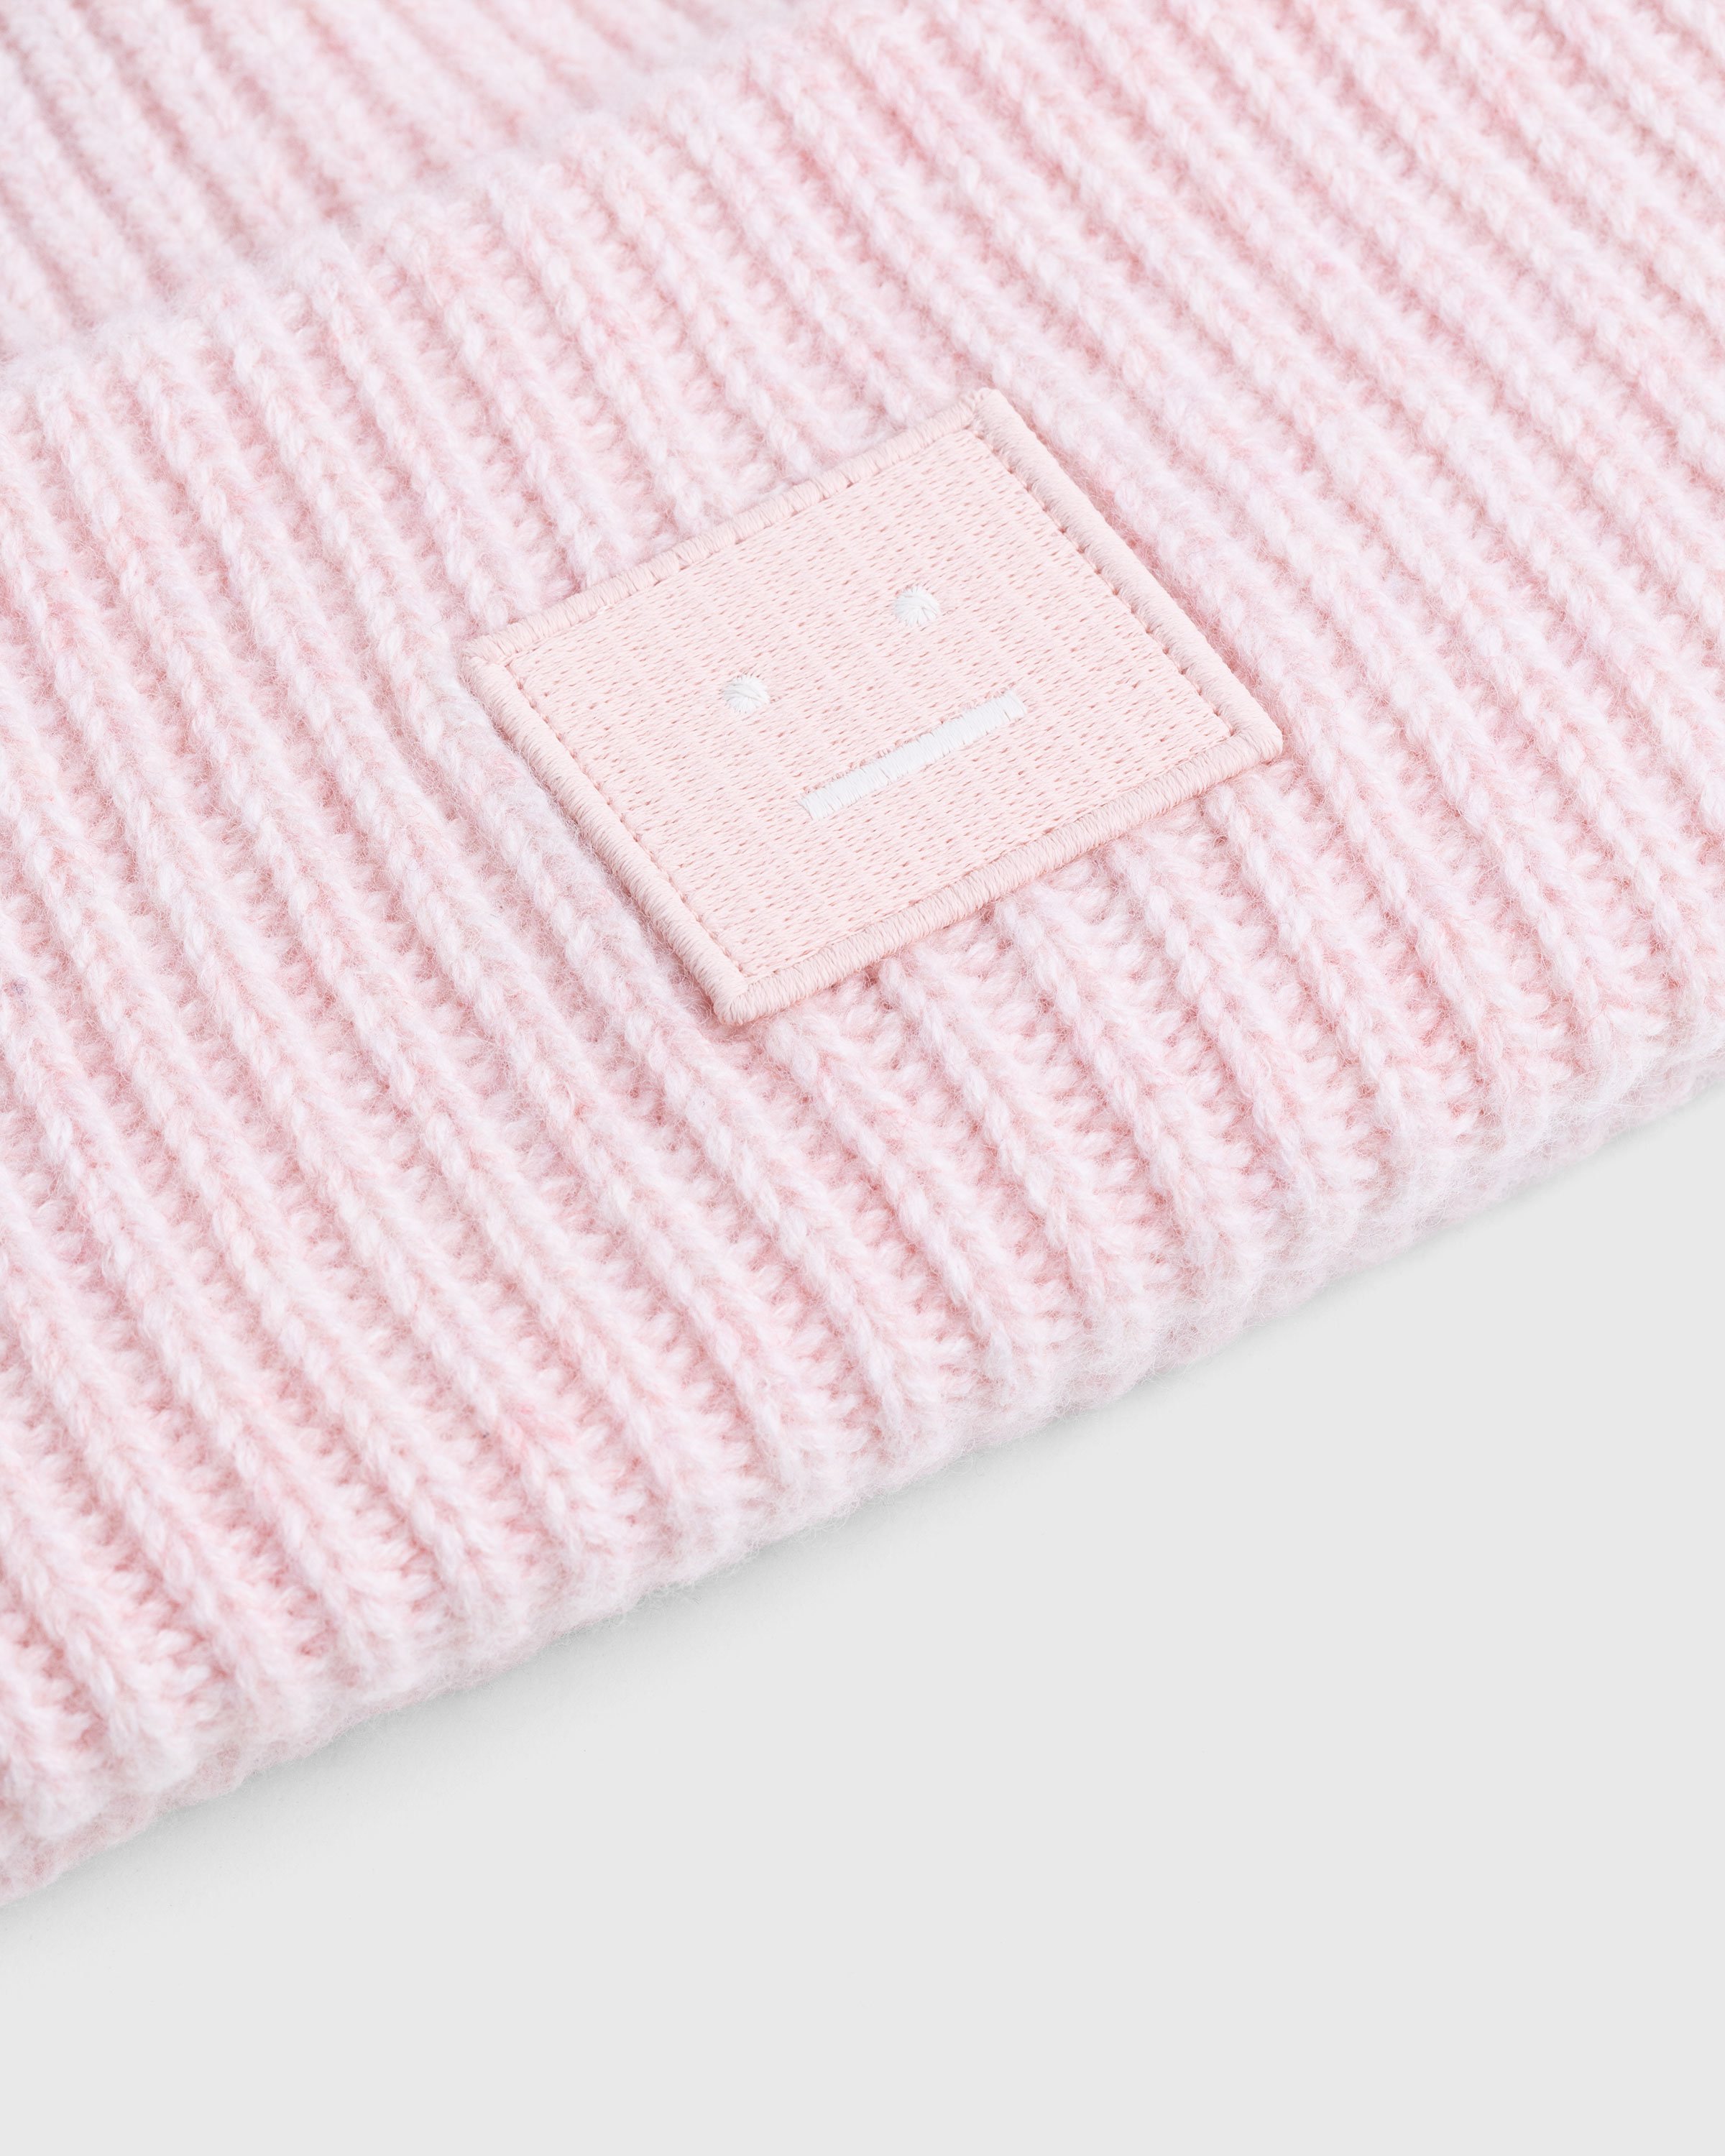 Acne Studios - Large Face Logo Beanie Pink - Accessories - Pink - Image 3